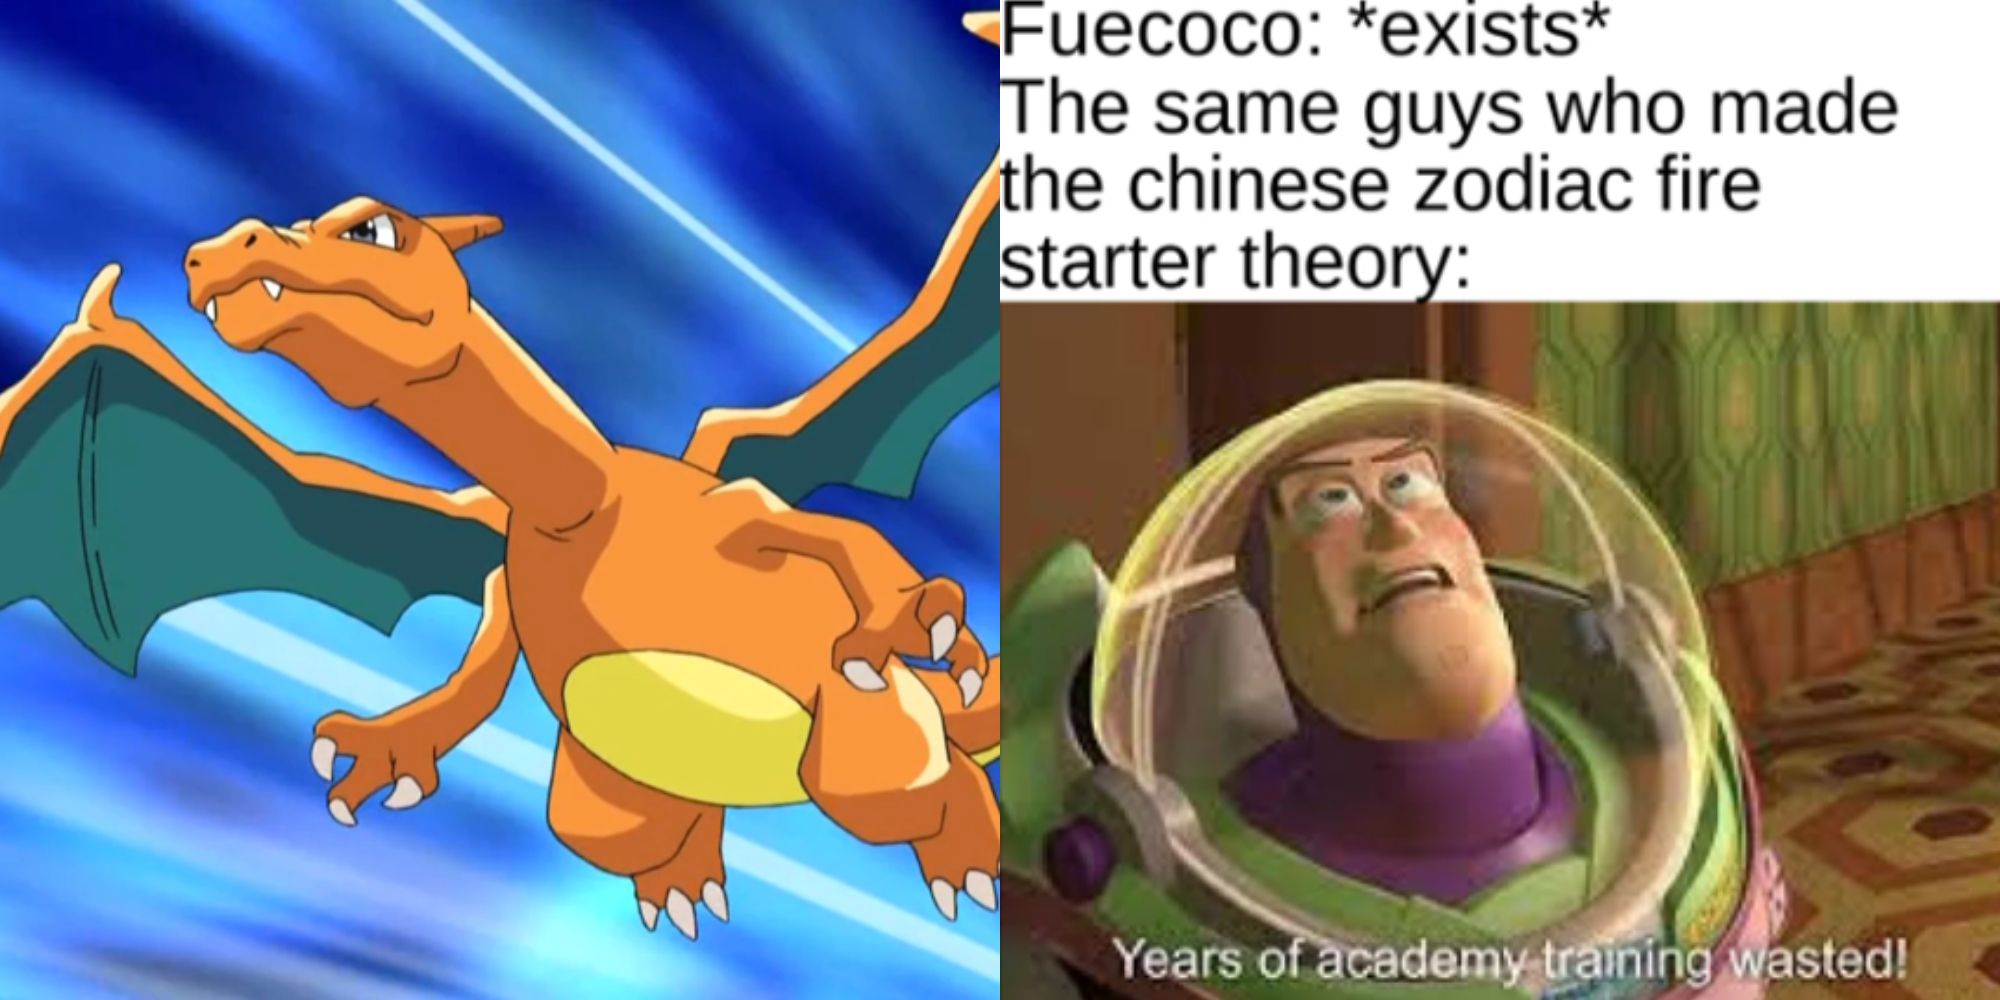 Split image showing Charizard in the Pokémon anime and a meme about Fuecoco.